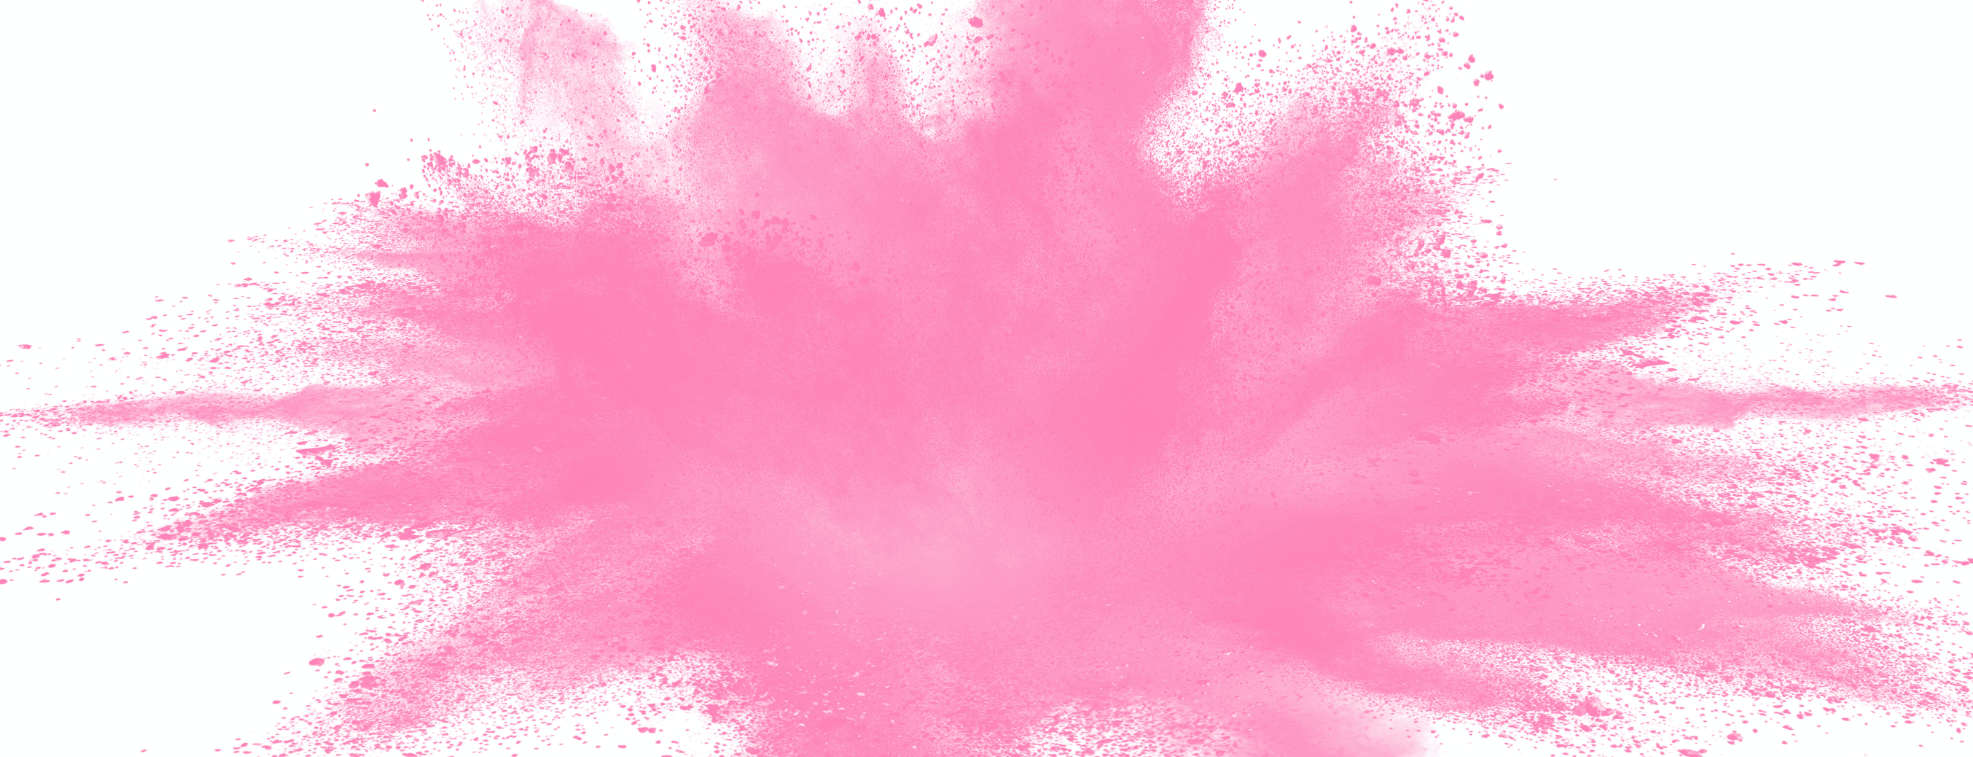 Sprinkled pink paint over white background